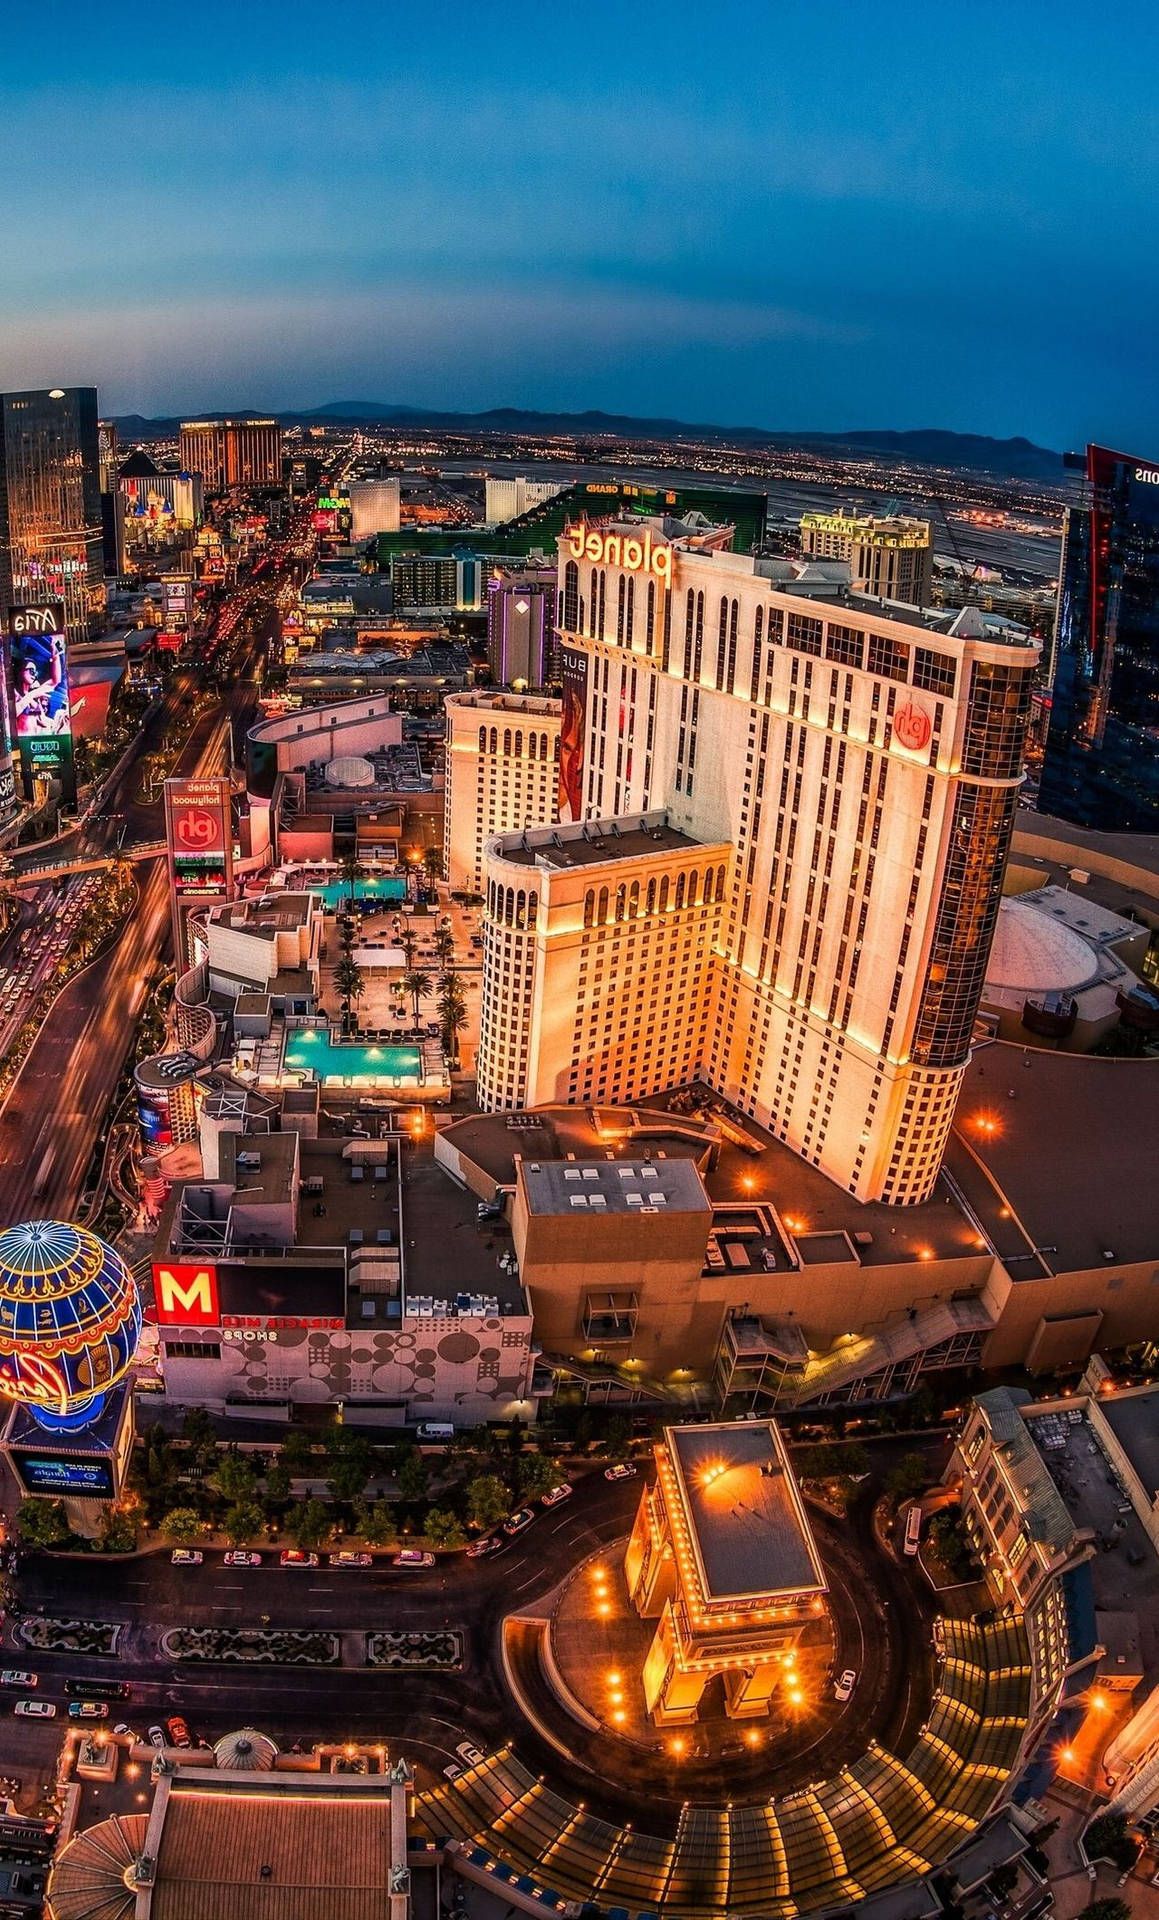 A view of the strip from above - Las Vegas